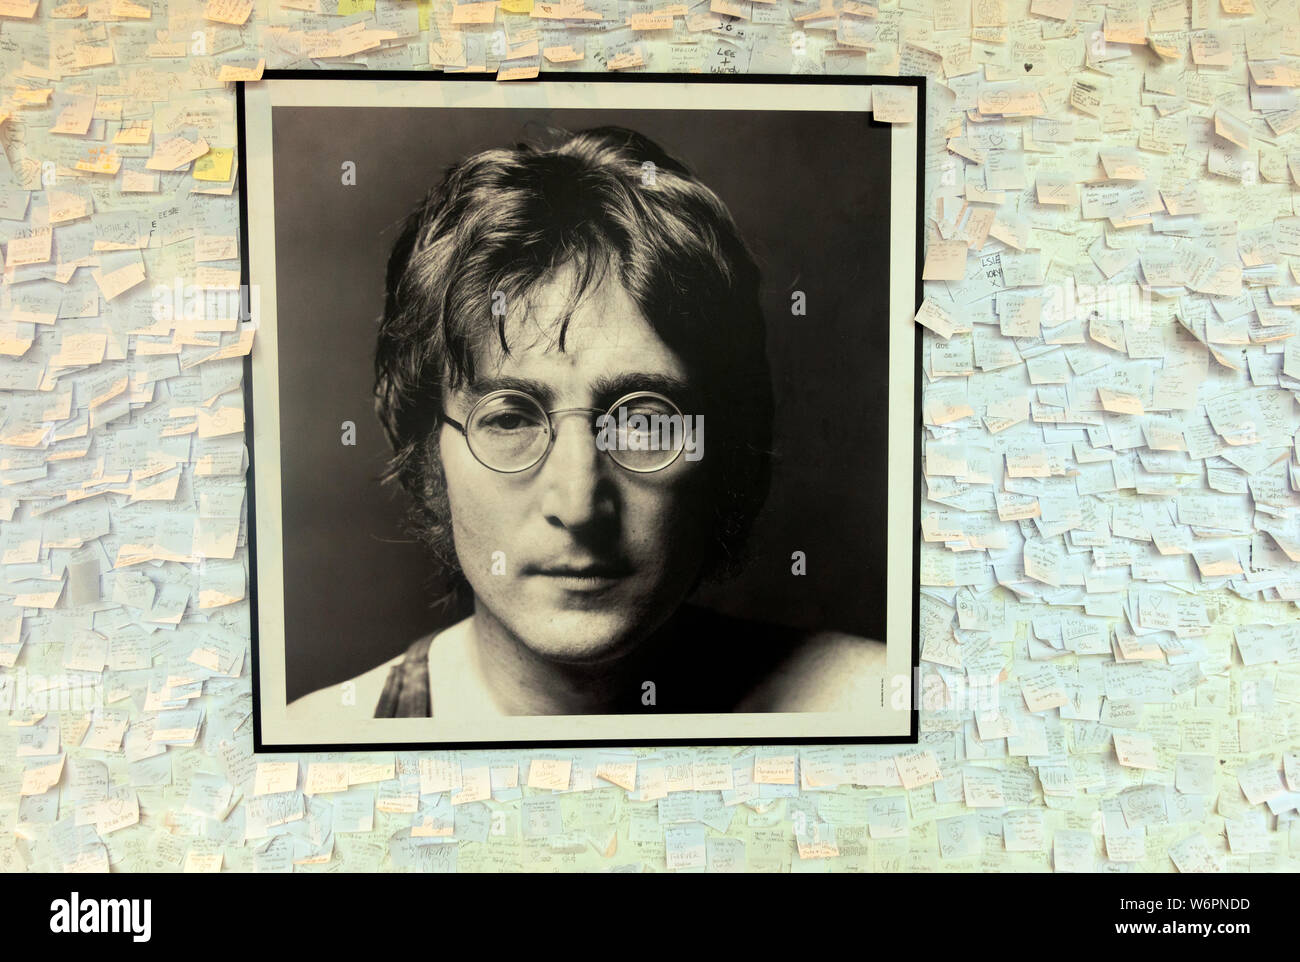 Photo of John Lennon (not mine) on display with post-it notes at Museum of Liverpool Stock Photo